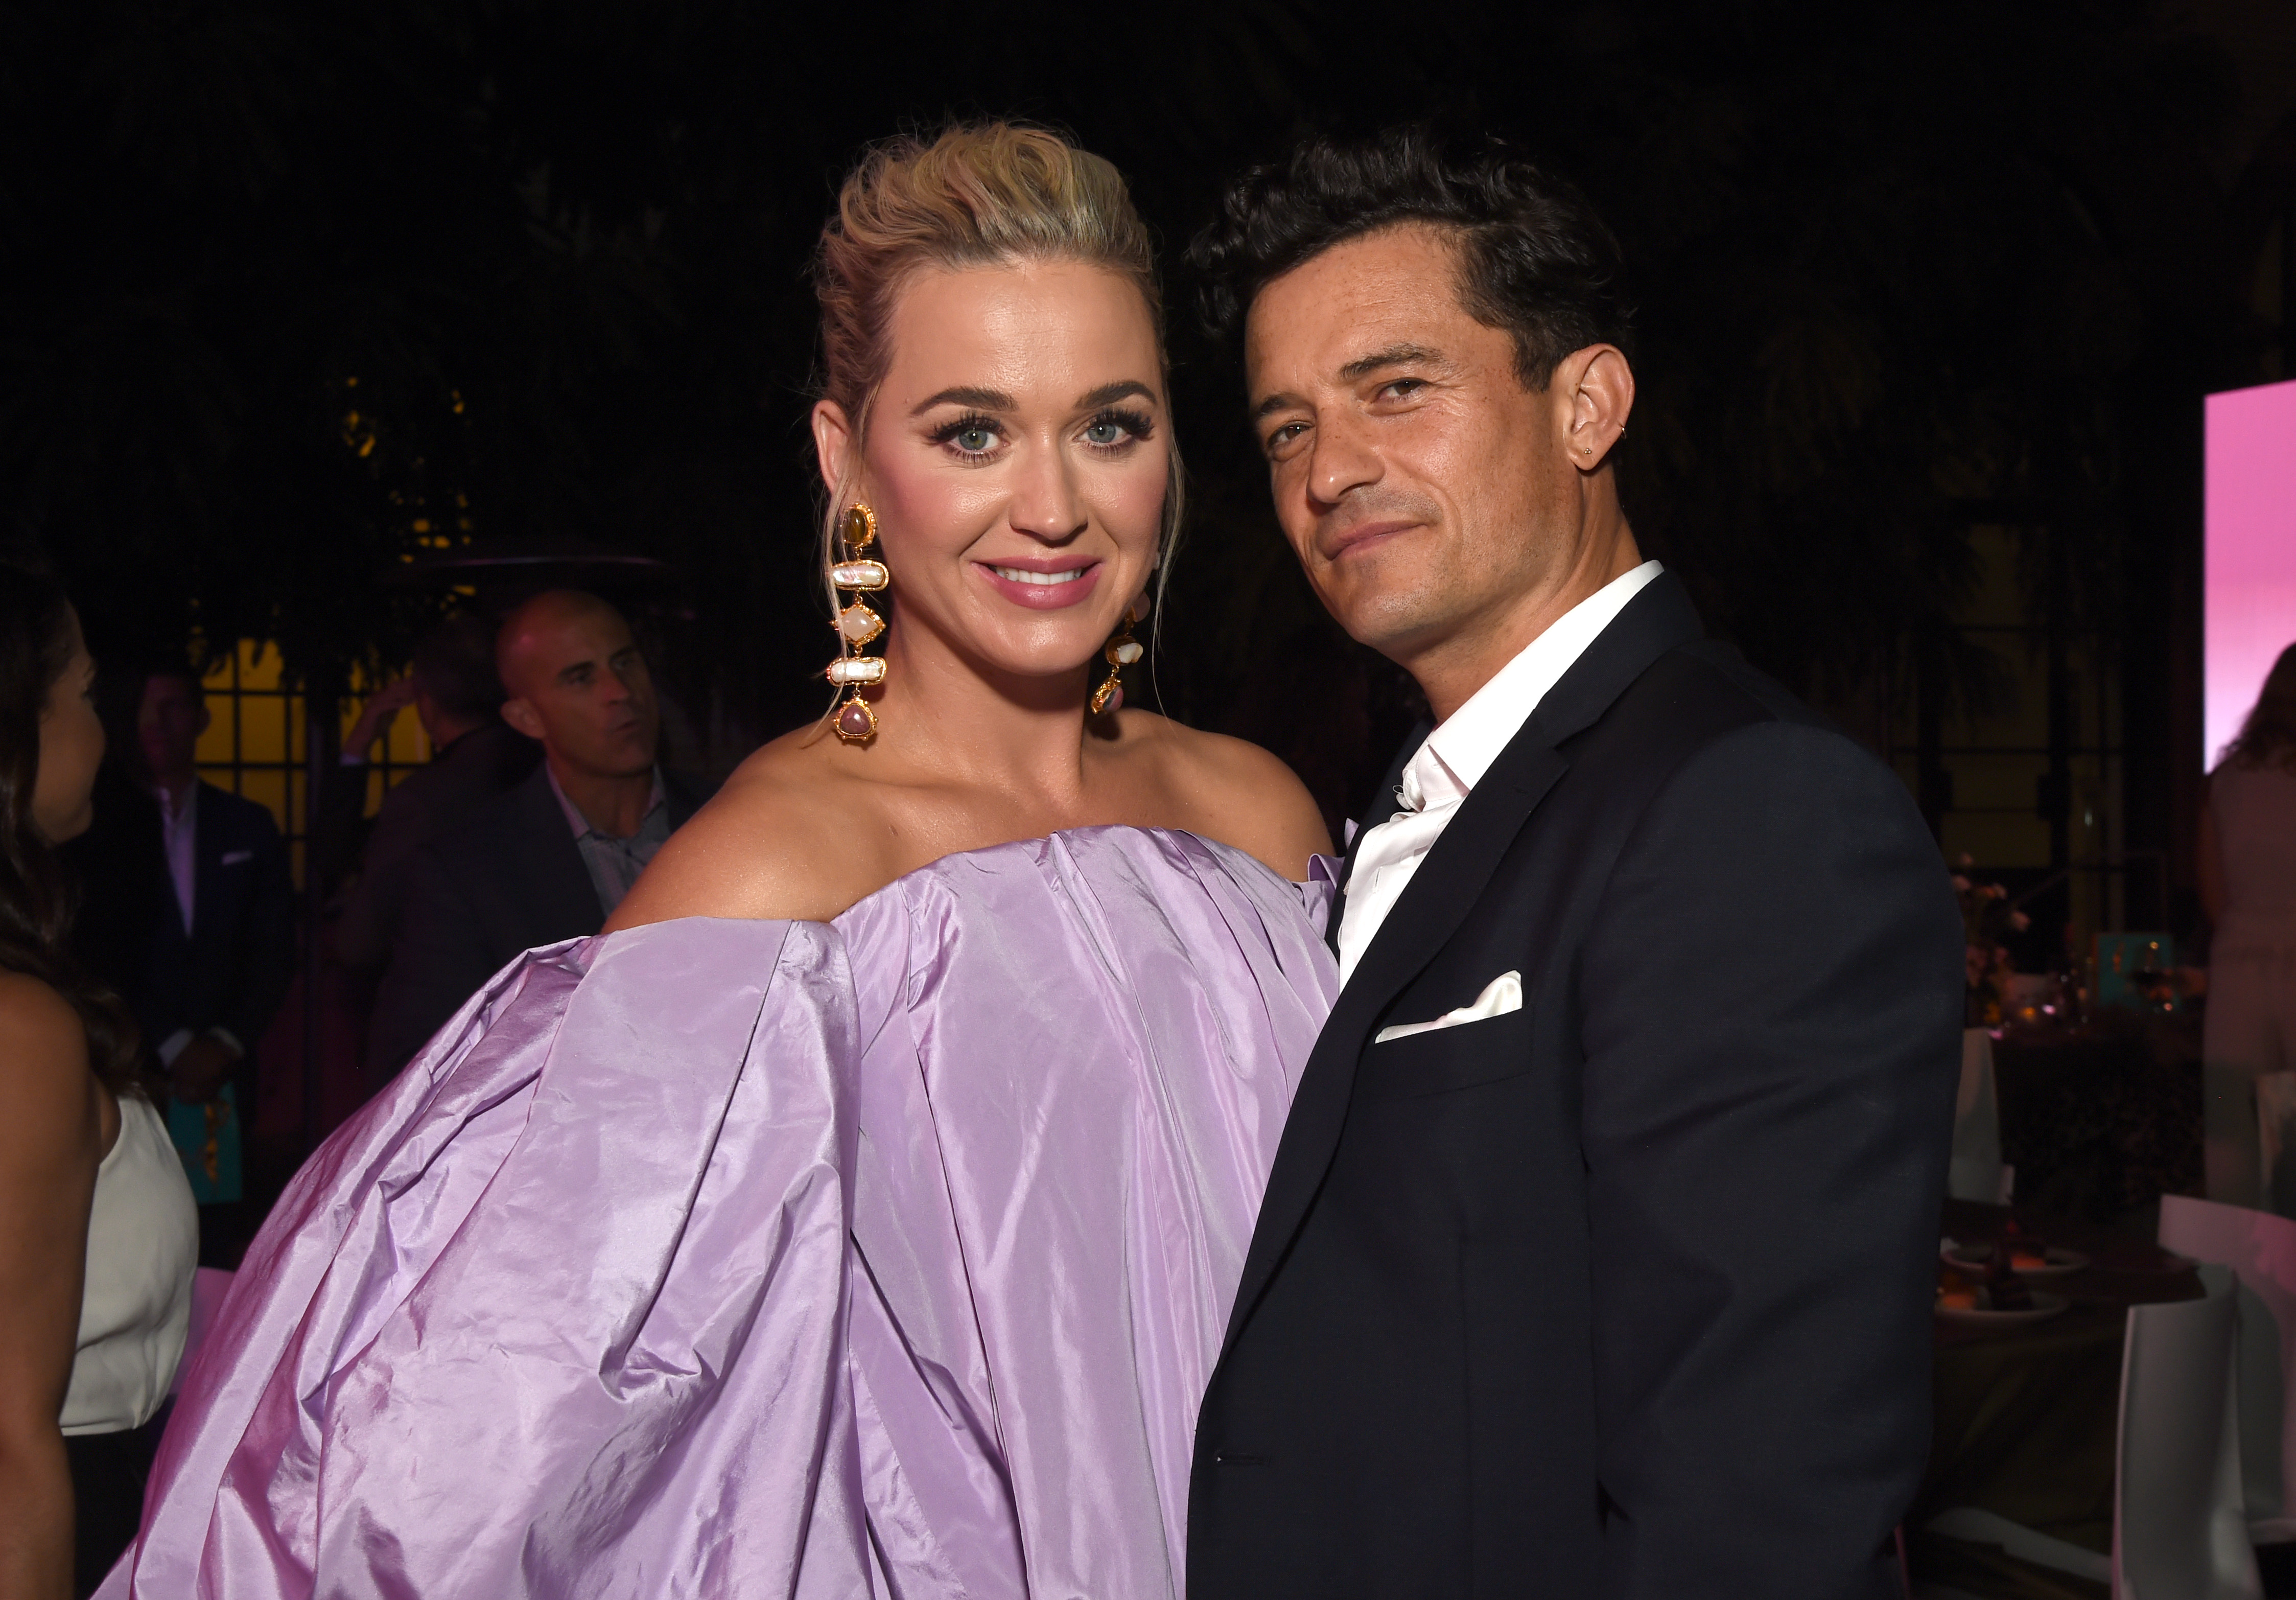 According to an insider, Katy wants a baby sibling for the daughter she shares with Orlando Bloom